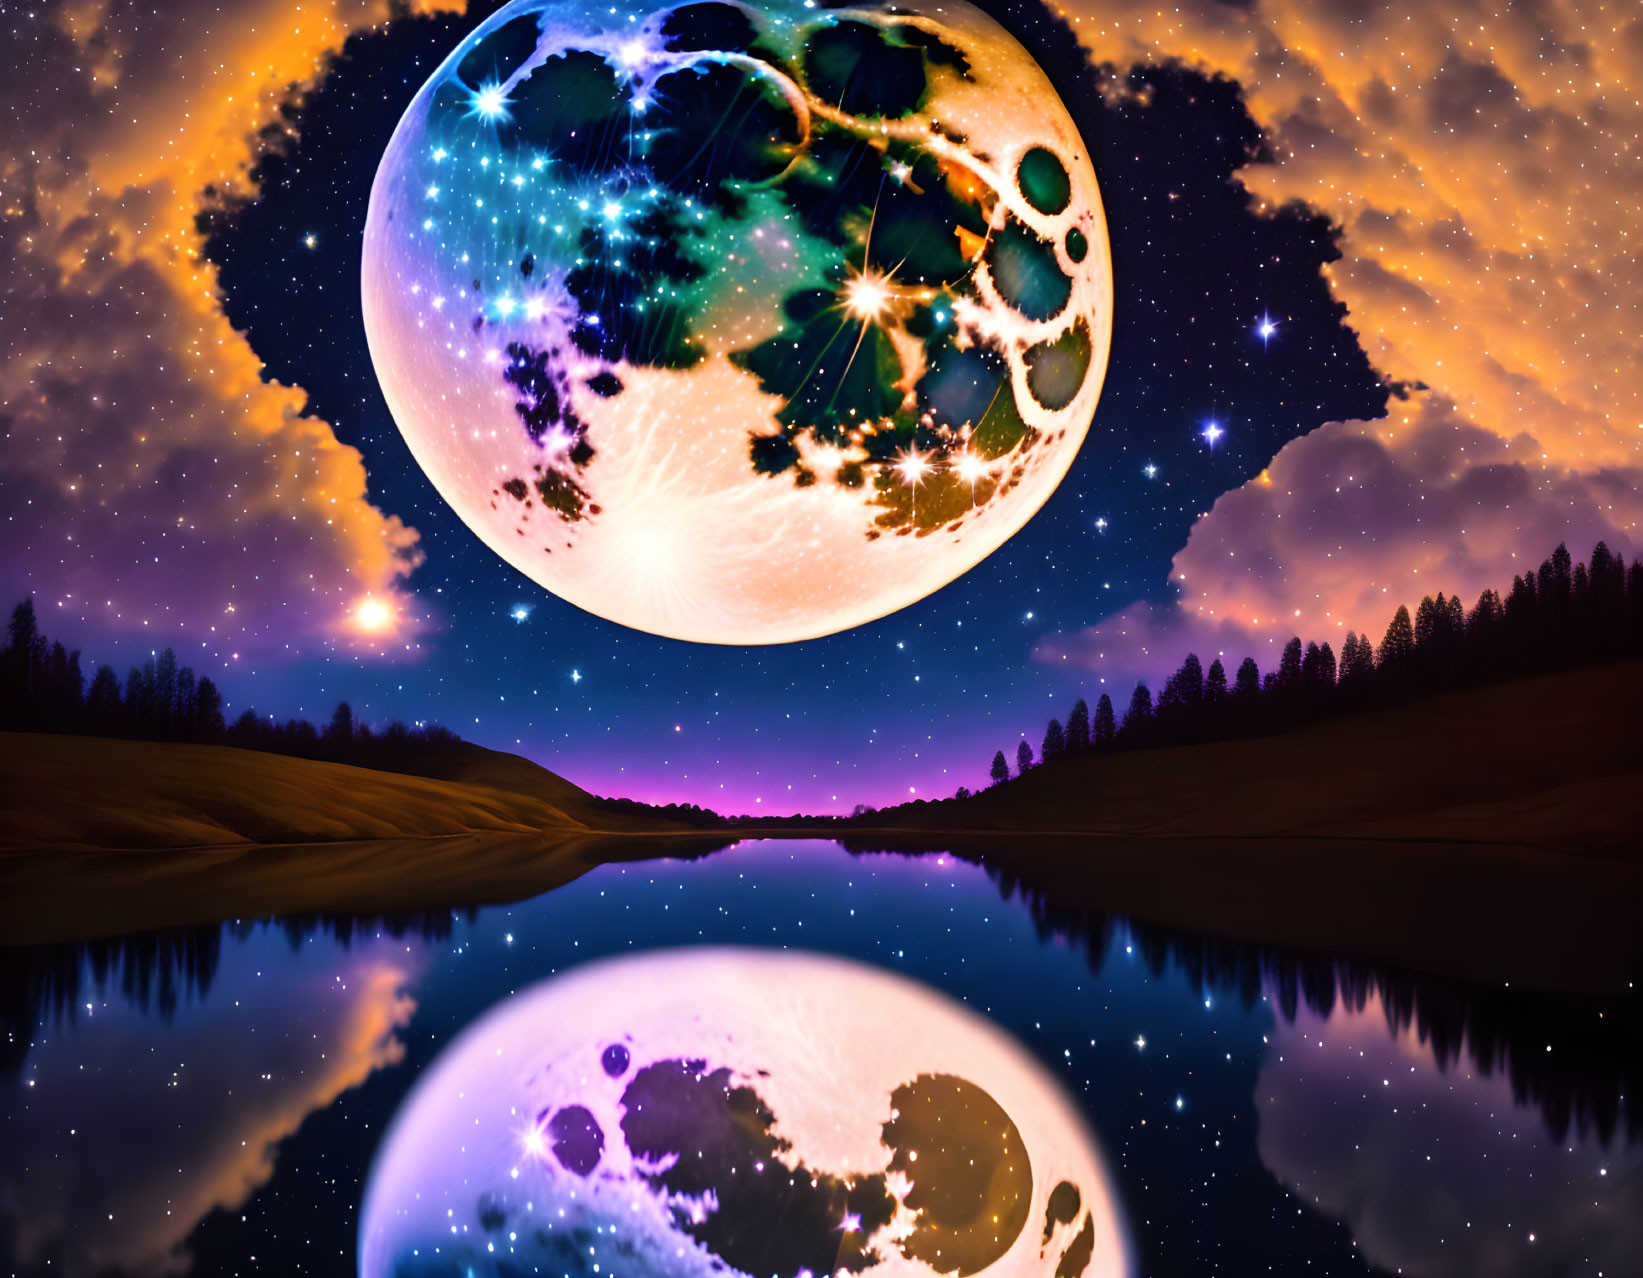 Gigantic moon over surreal night landscape with calm river